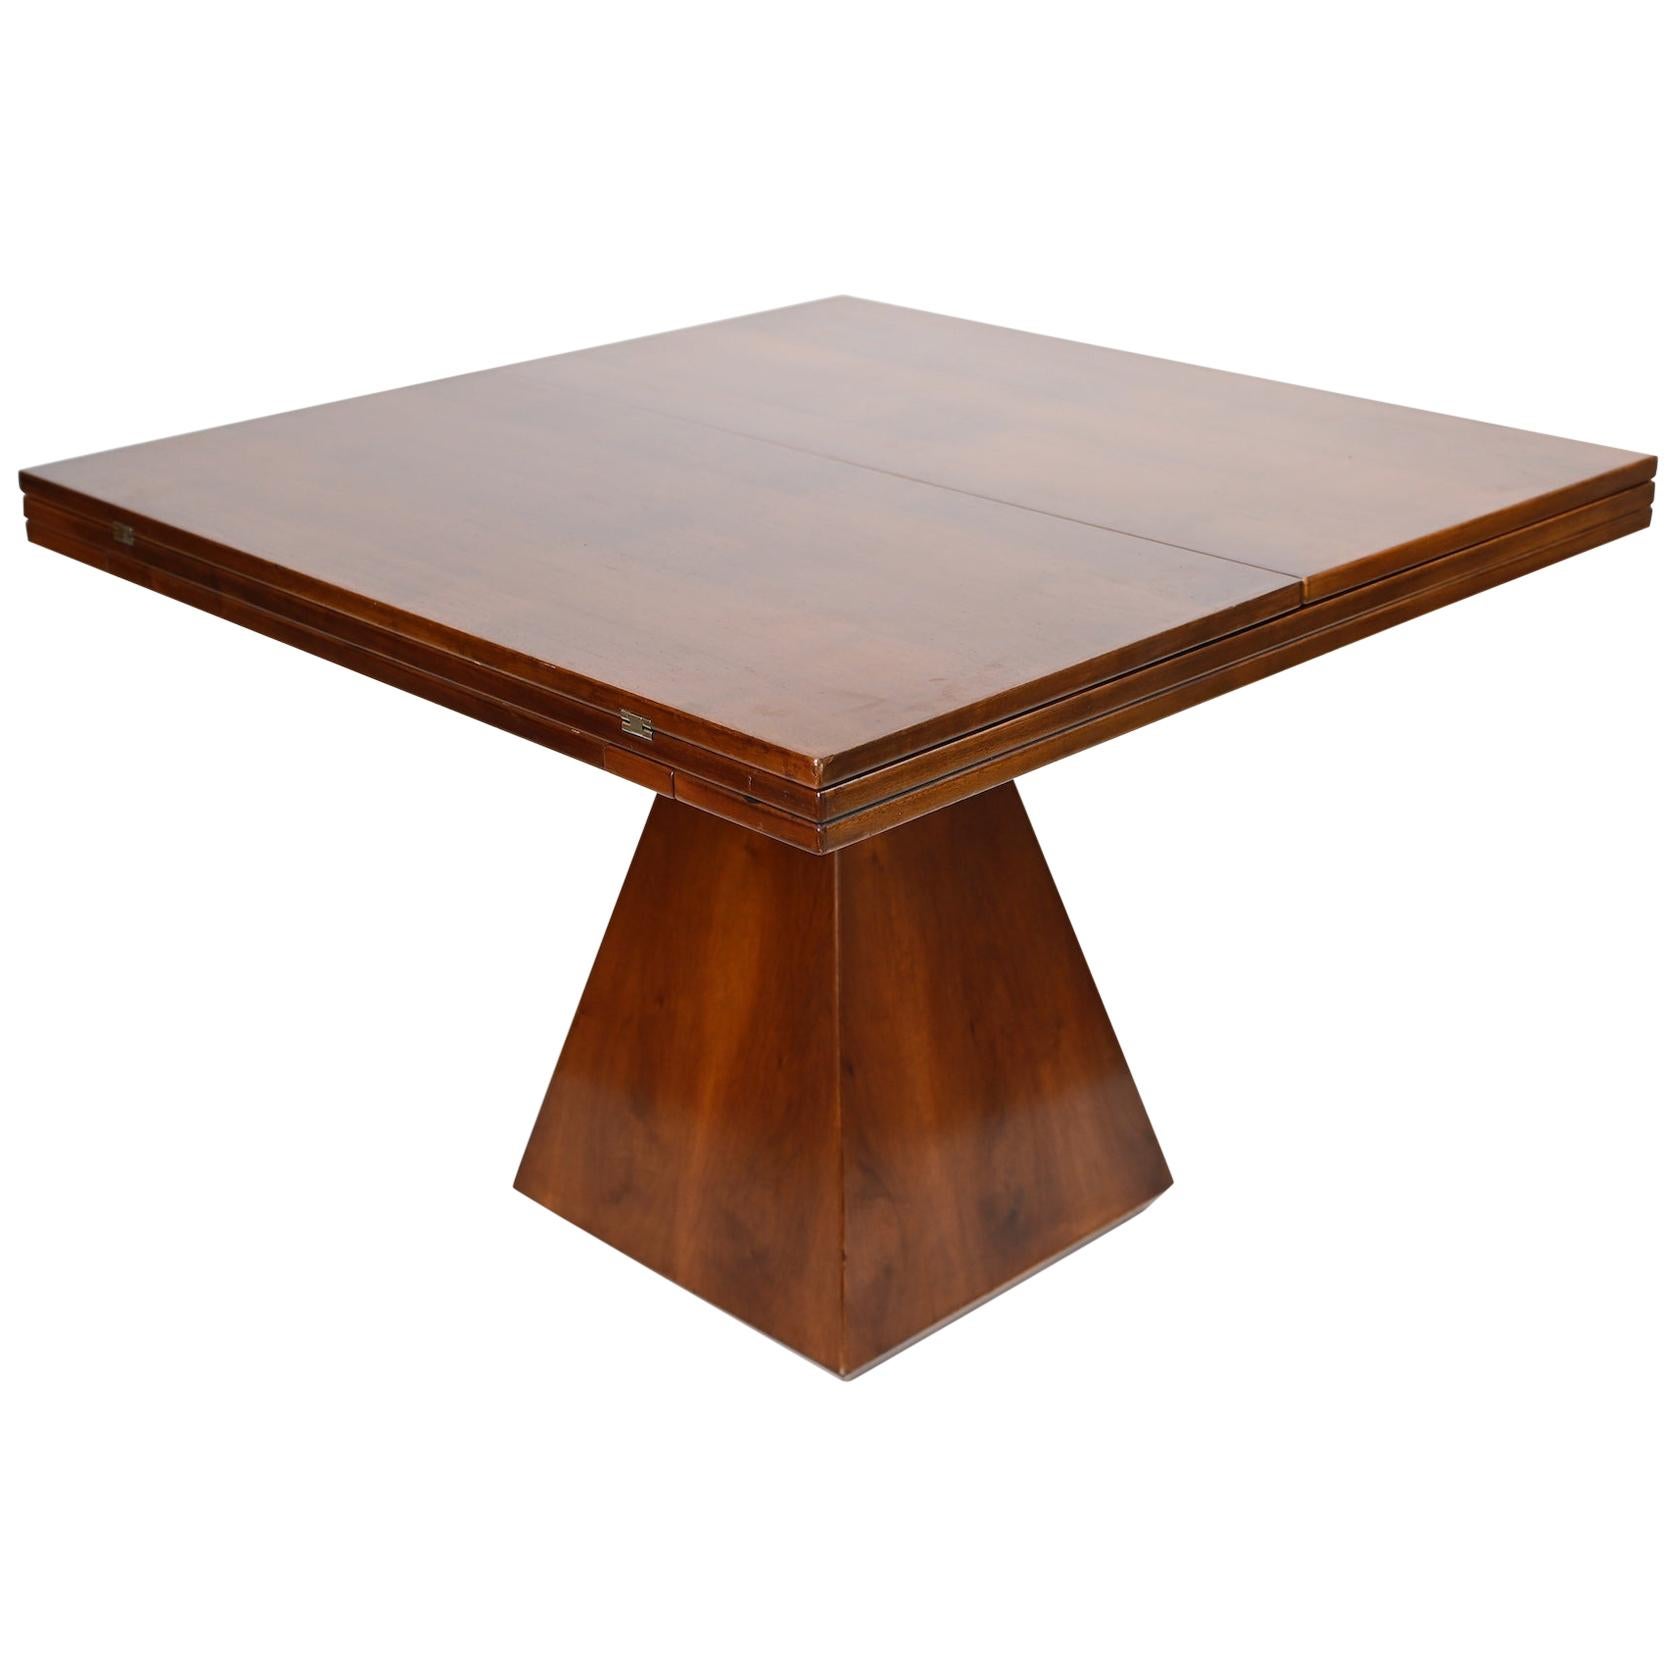 Geometric Expanding Table in Walnut circa 1960 by Introini